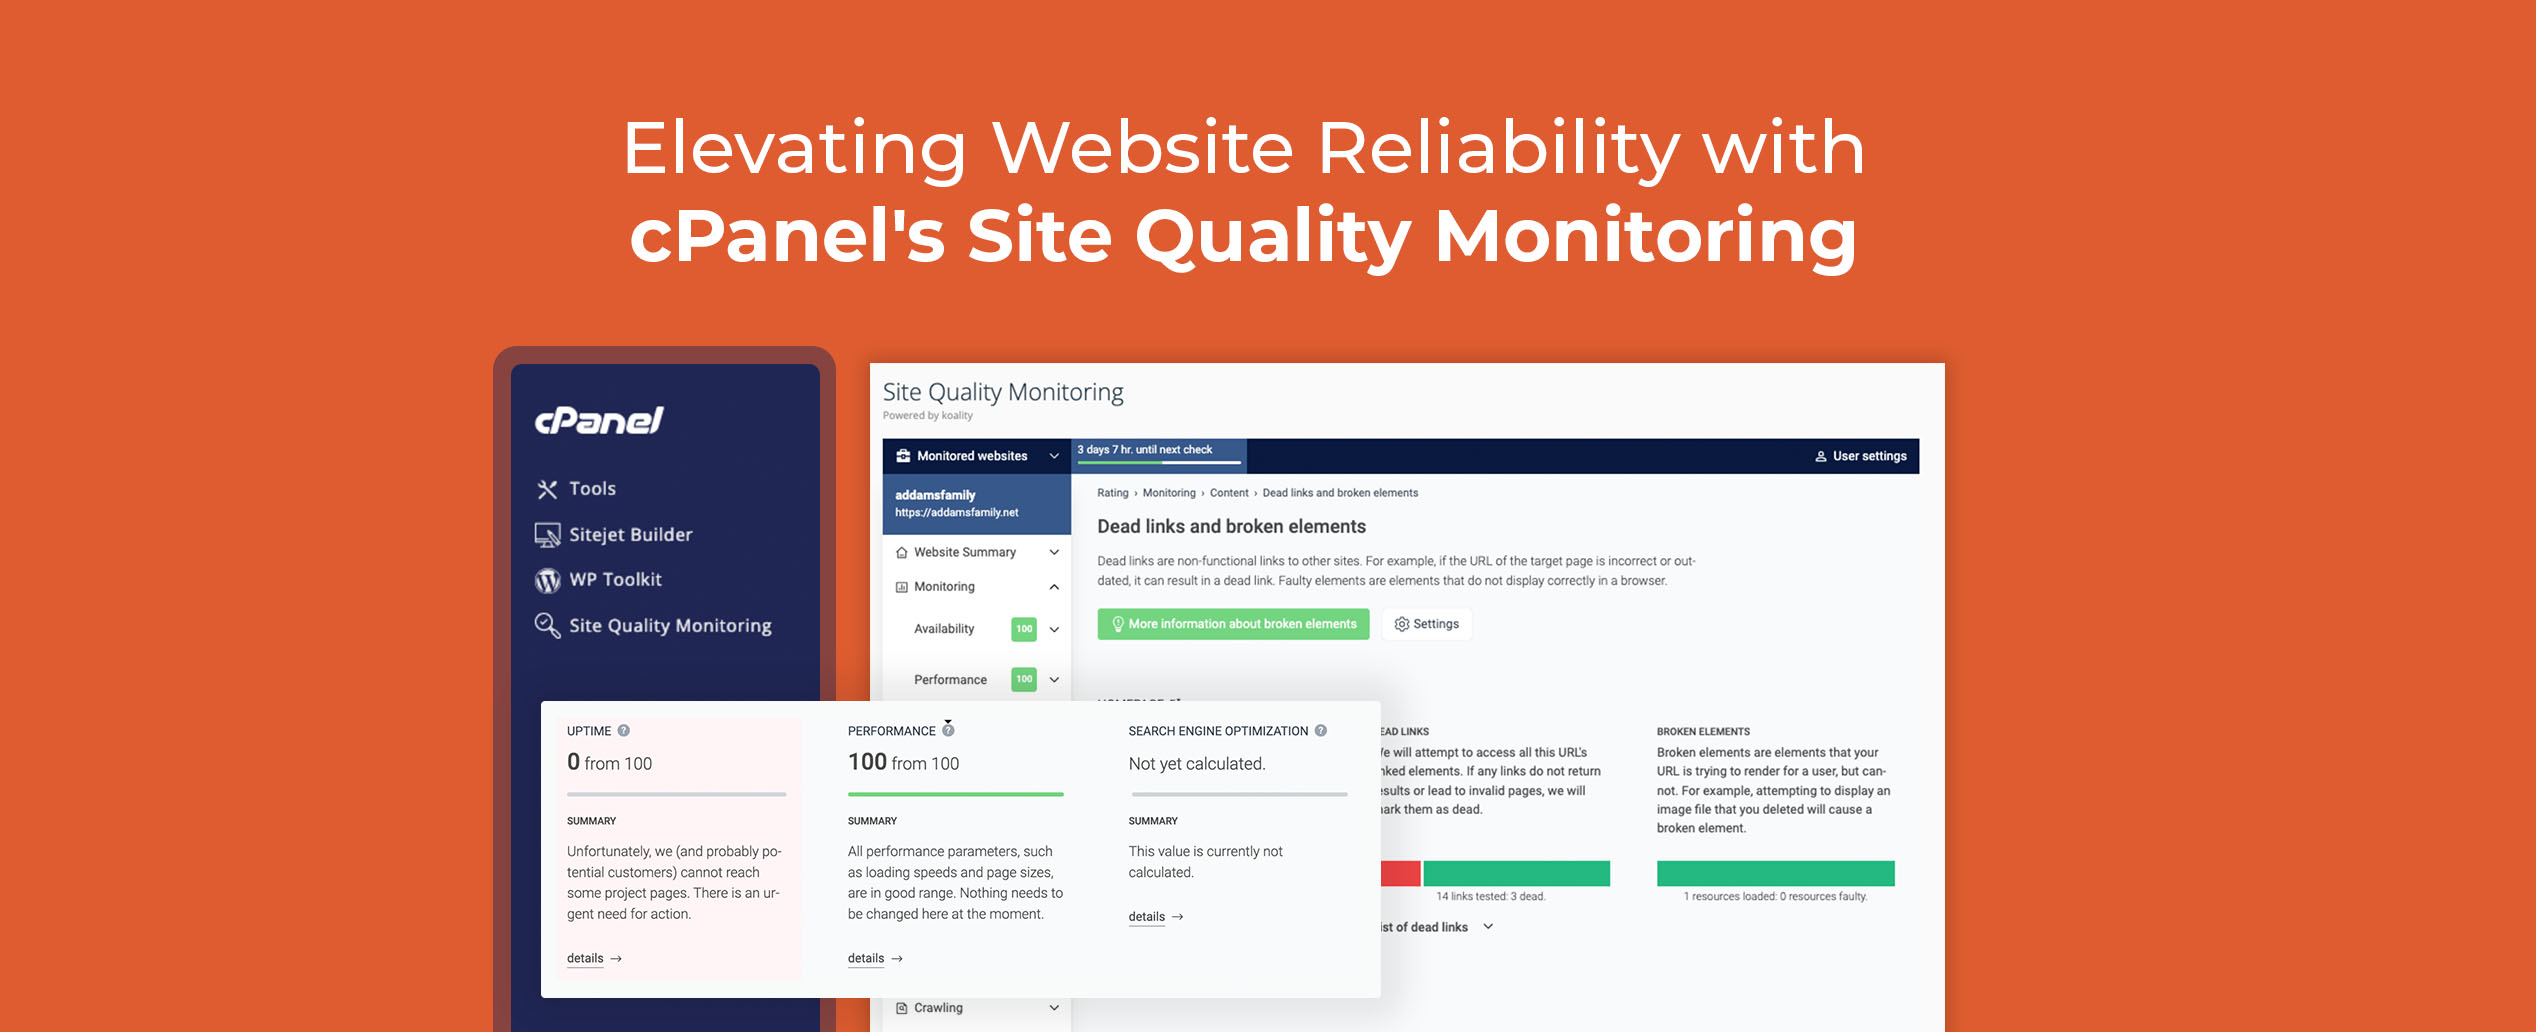 Elevating Website Reliability with cPanel’s Site Quality Monitoring